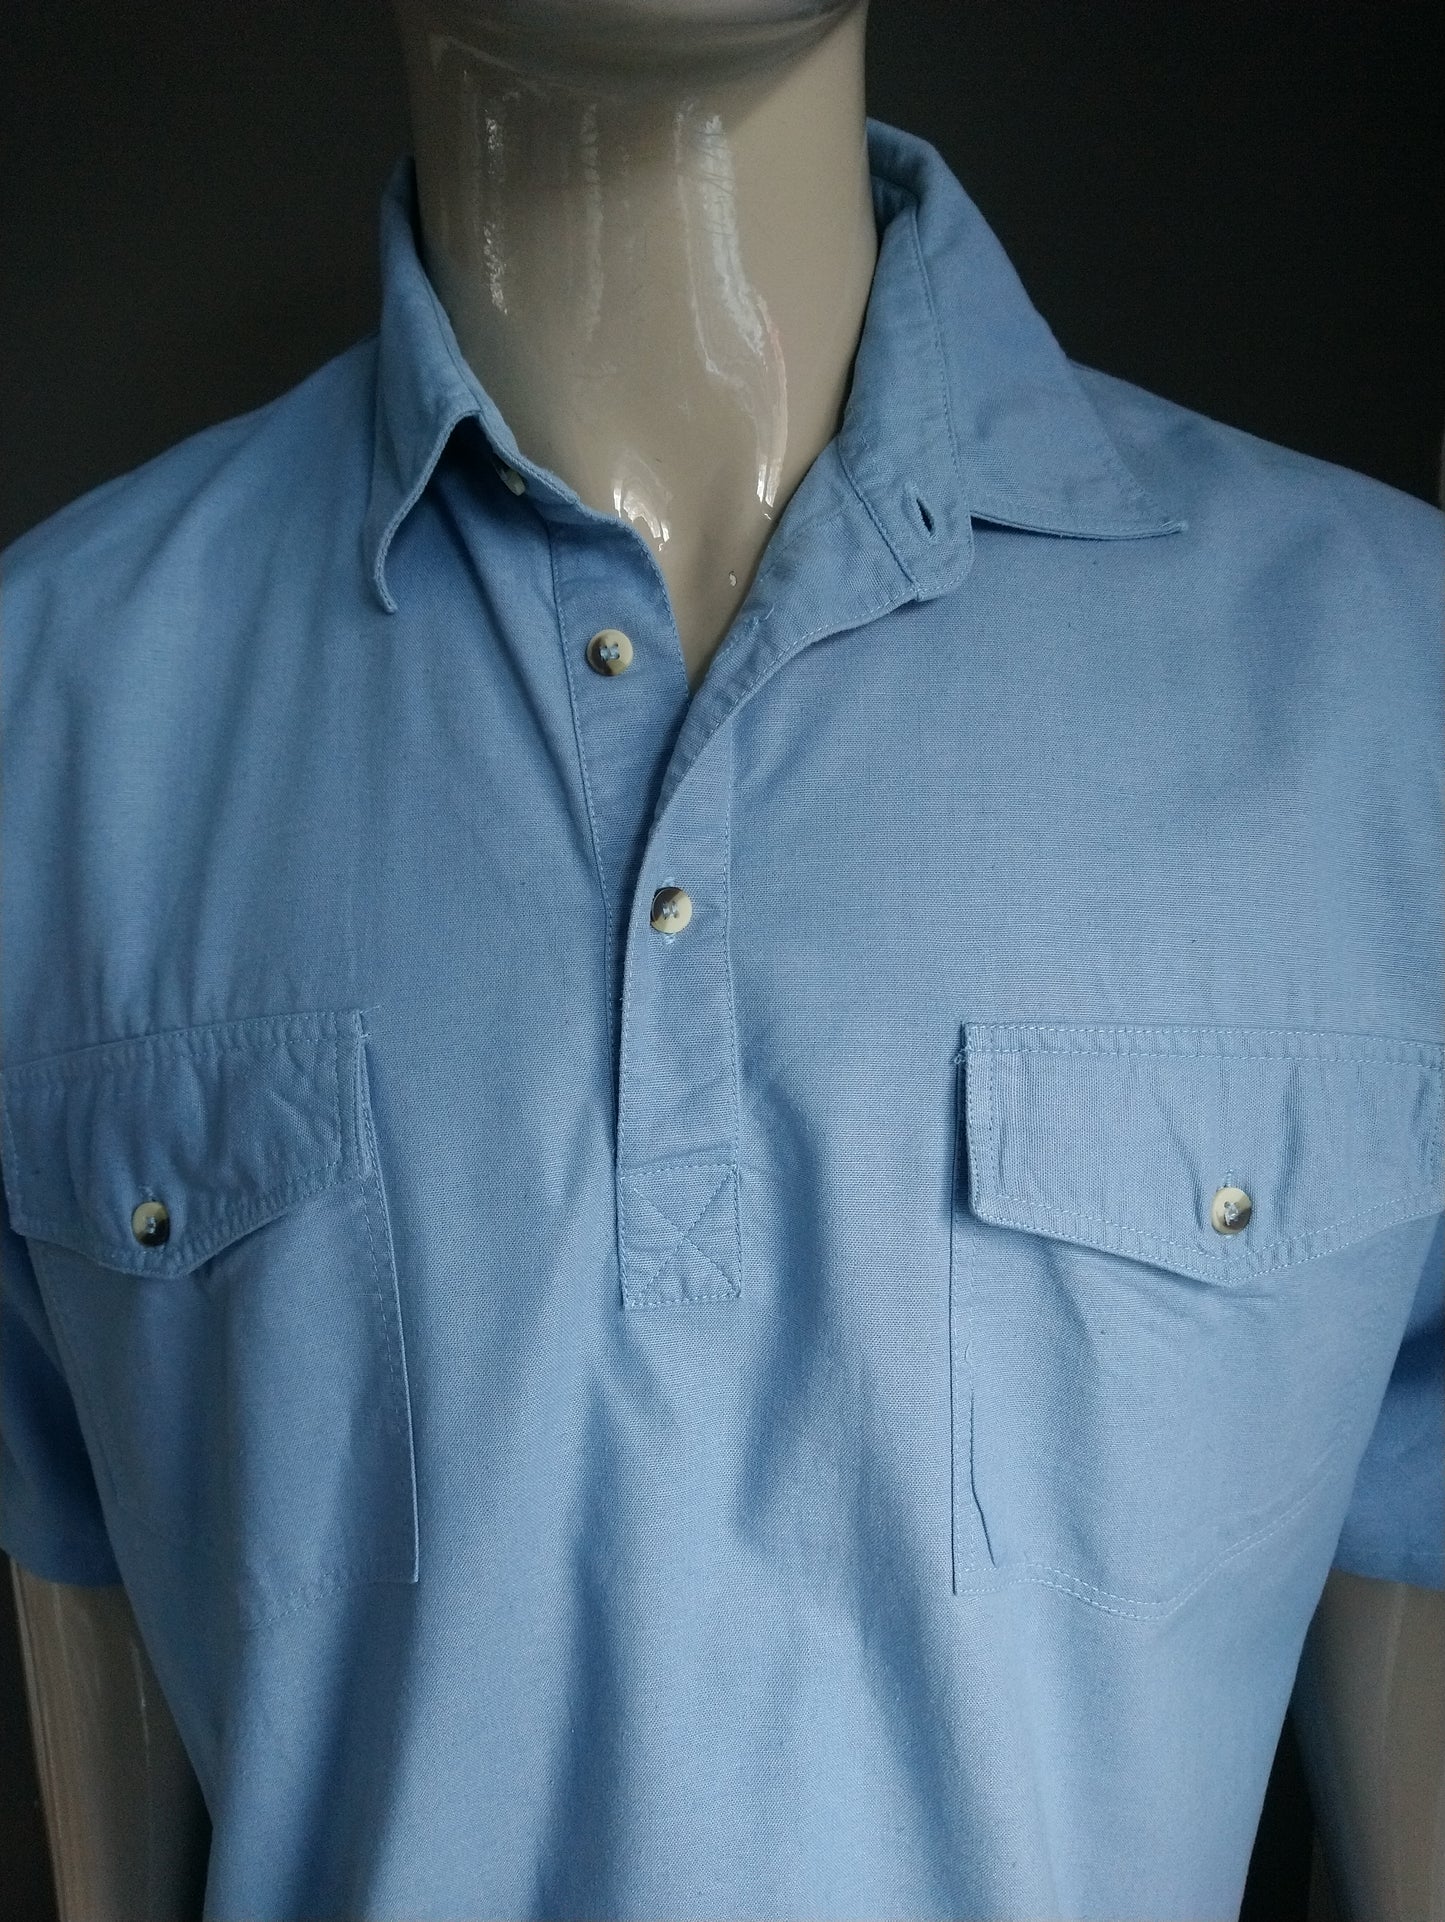 Vintage C&A Polo with elastic band. Light blue colored. Size XL / XXL - 2XL.